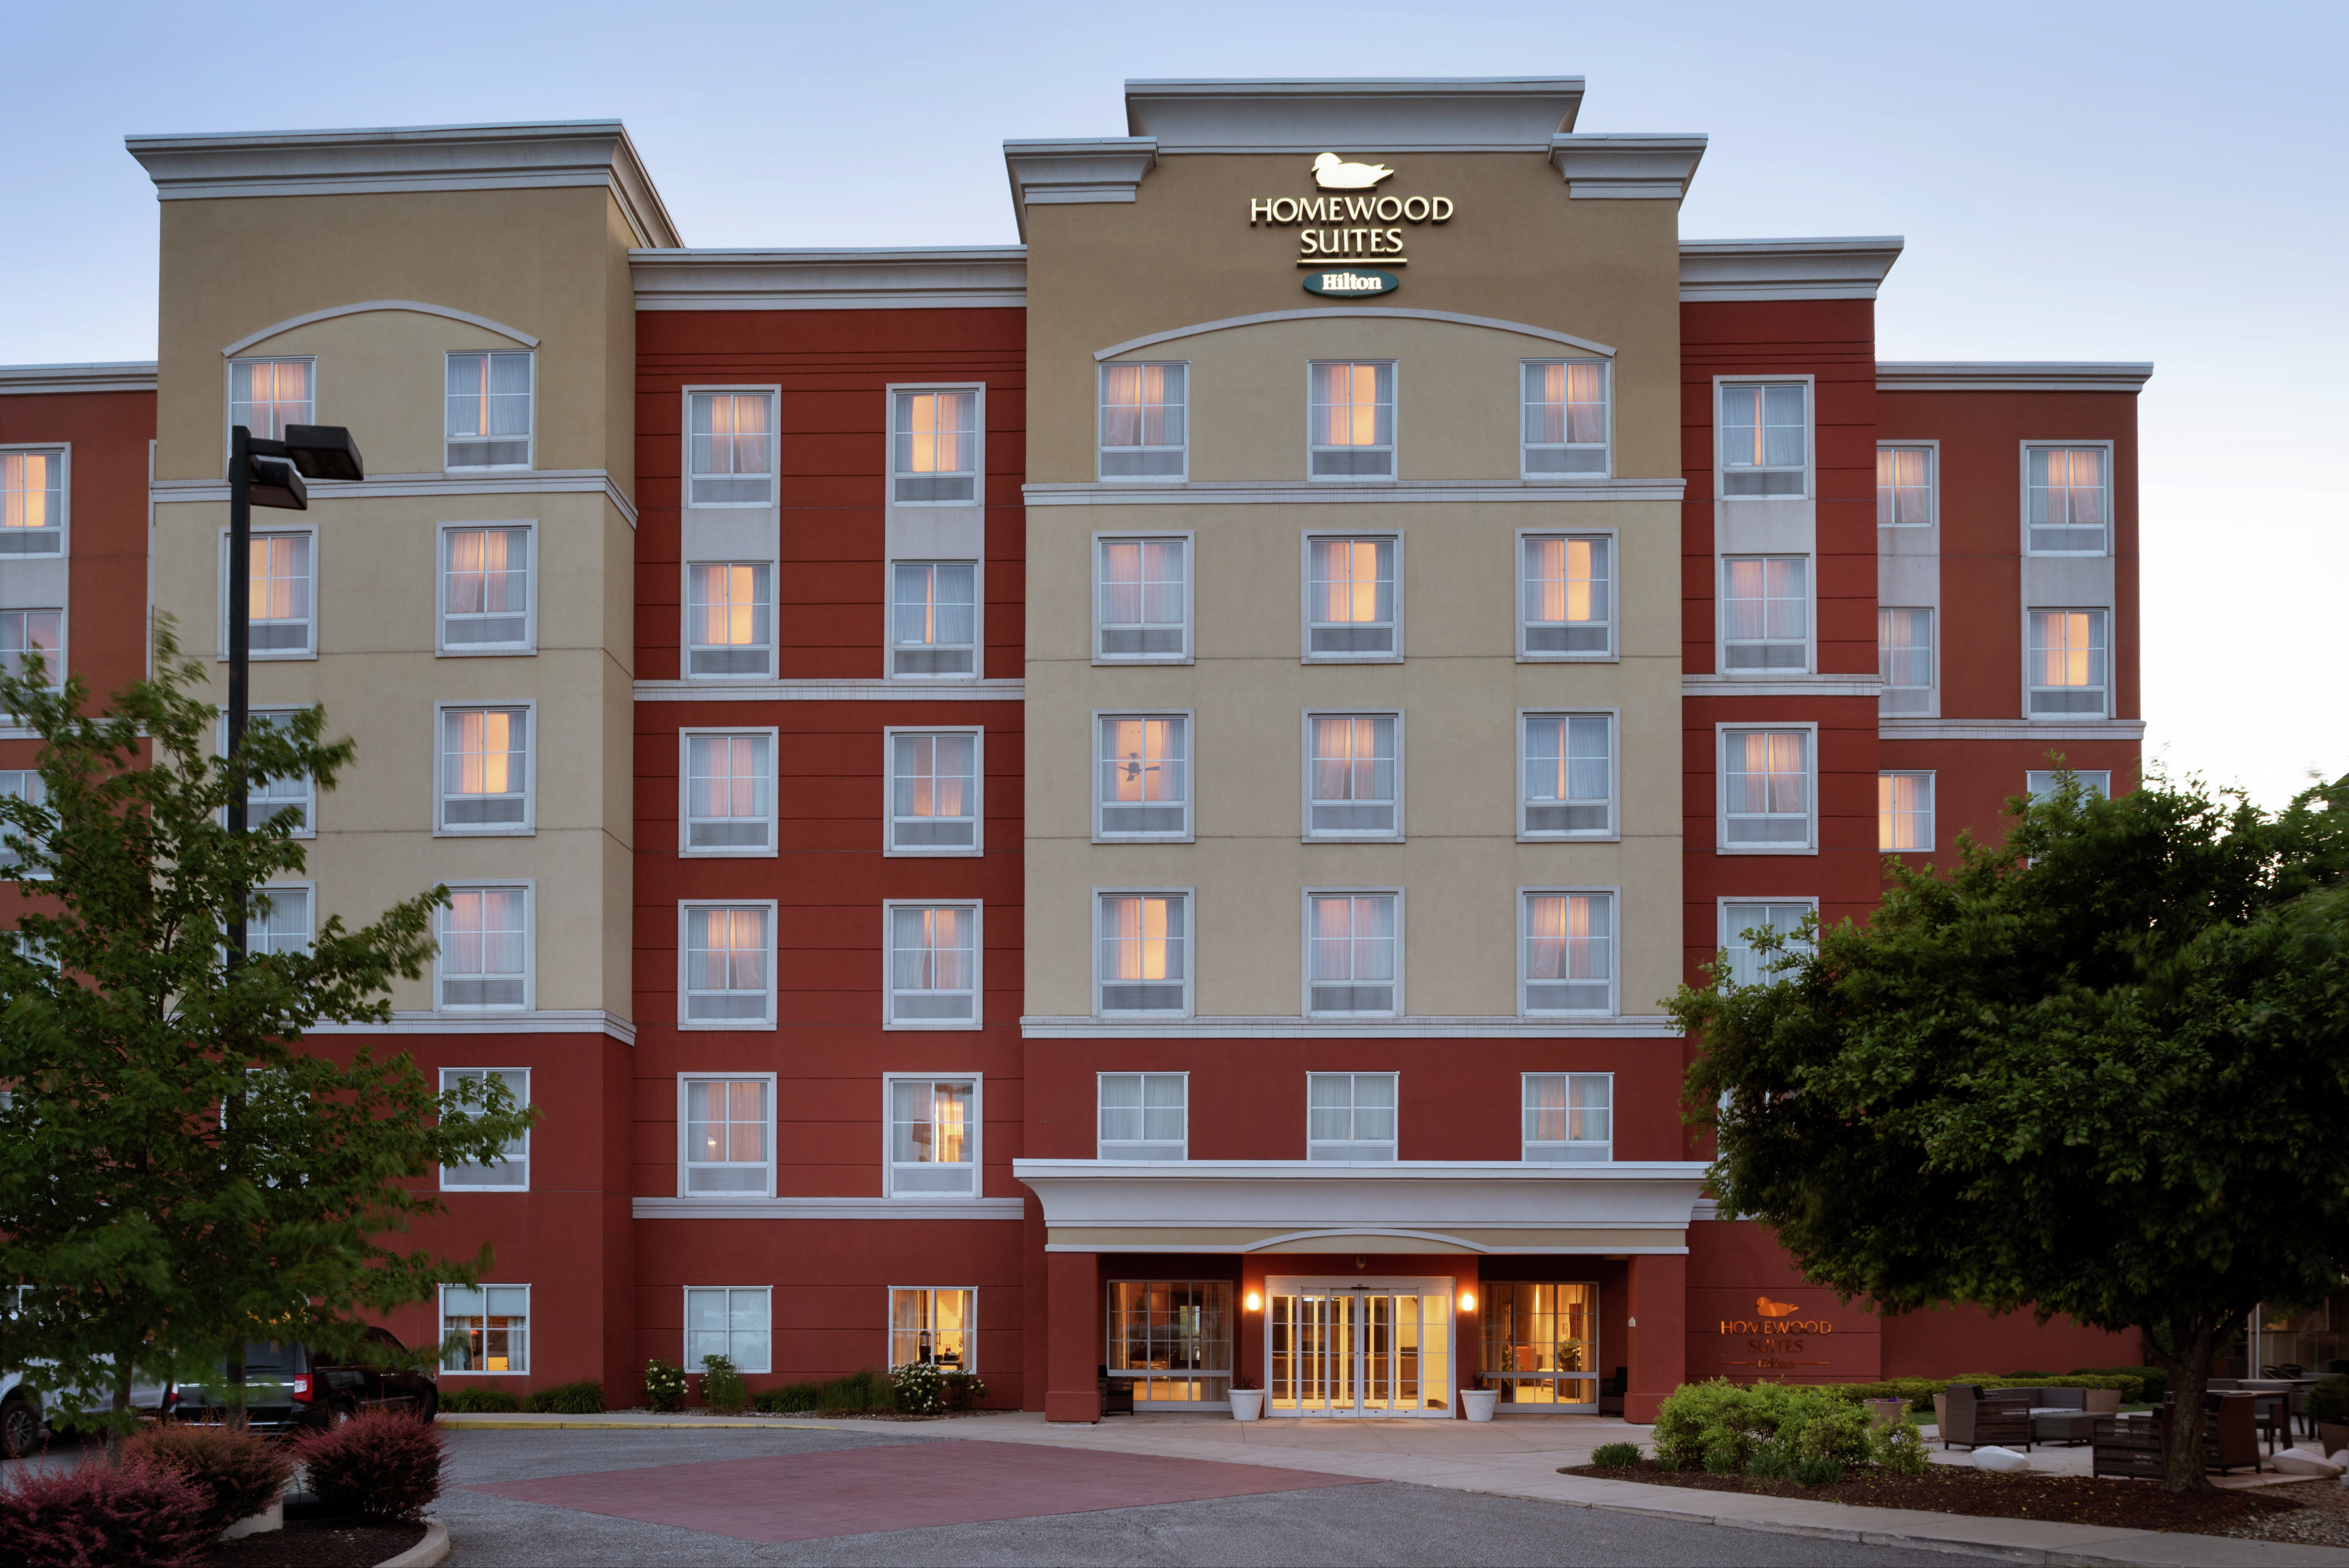 Welcoming Homewood Suites hotel exterior featuring glowing guest rooms, beautiful dusk sky, and lush trees.